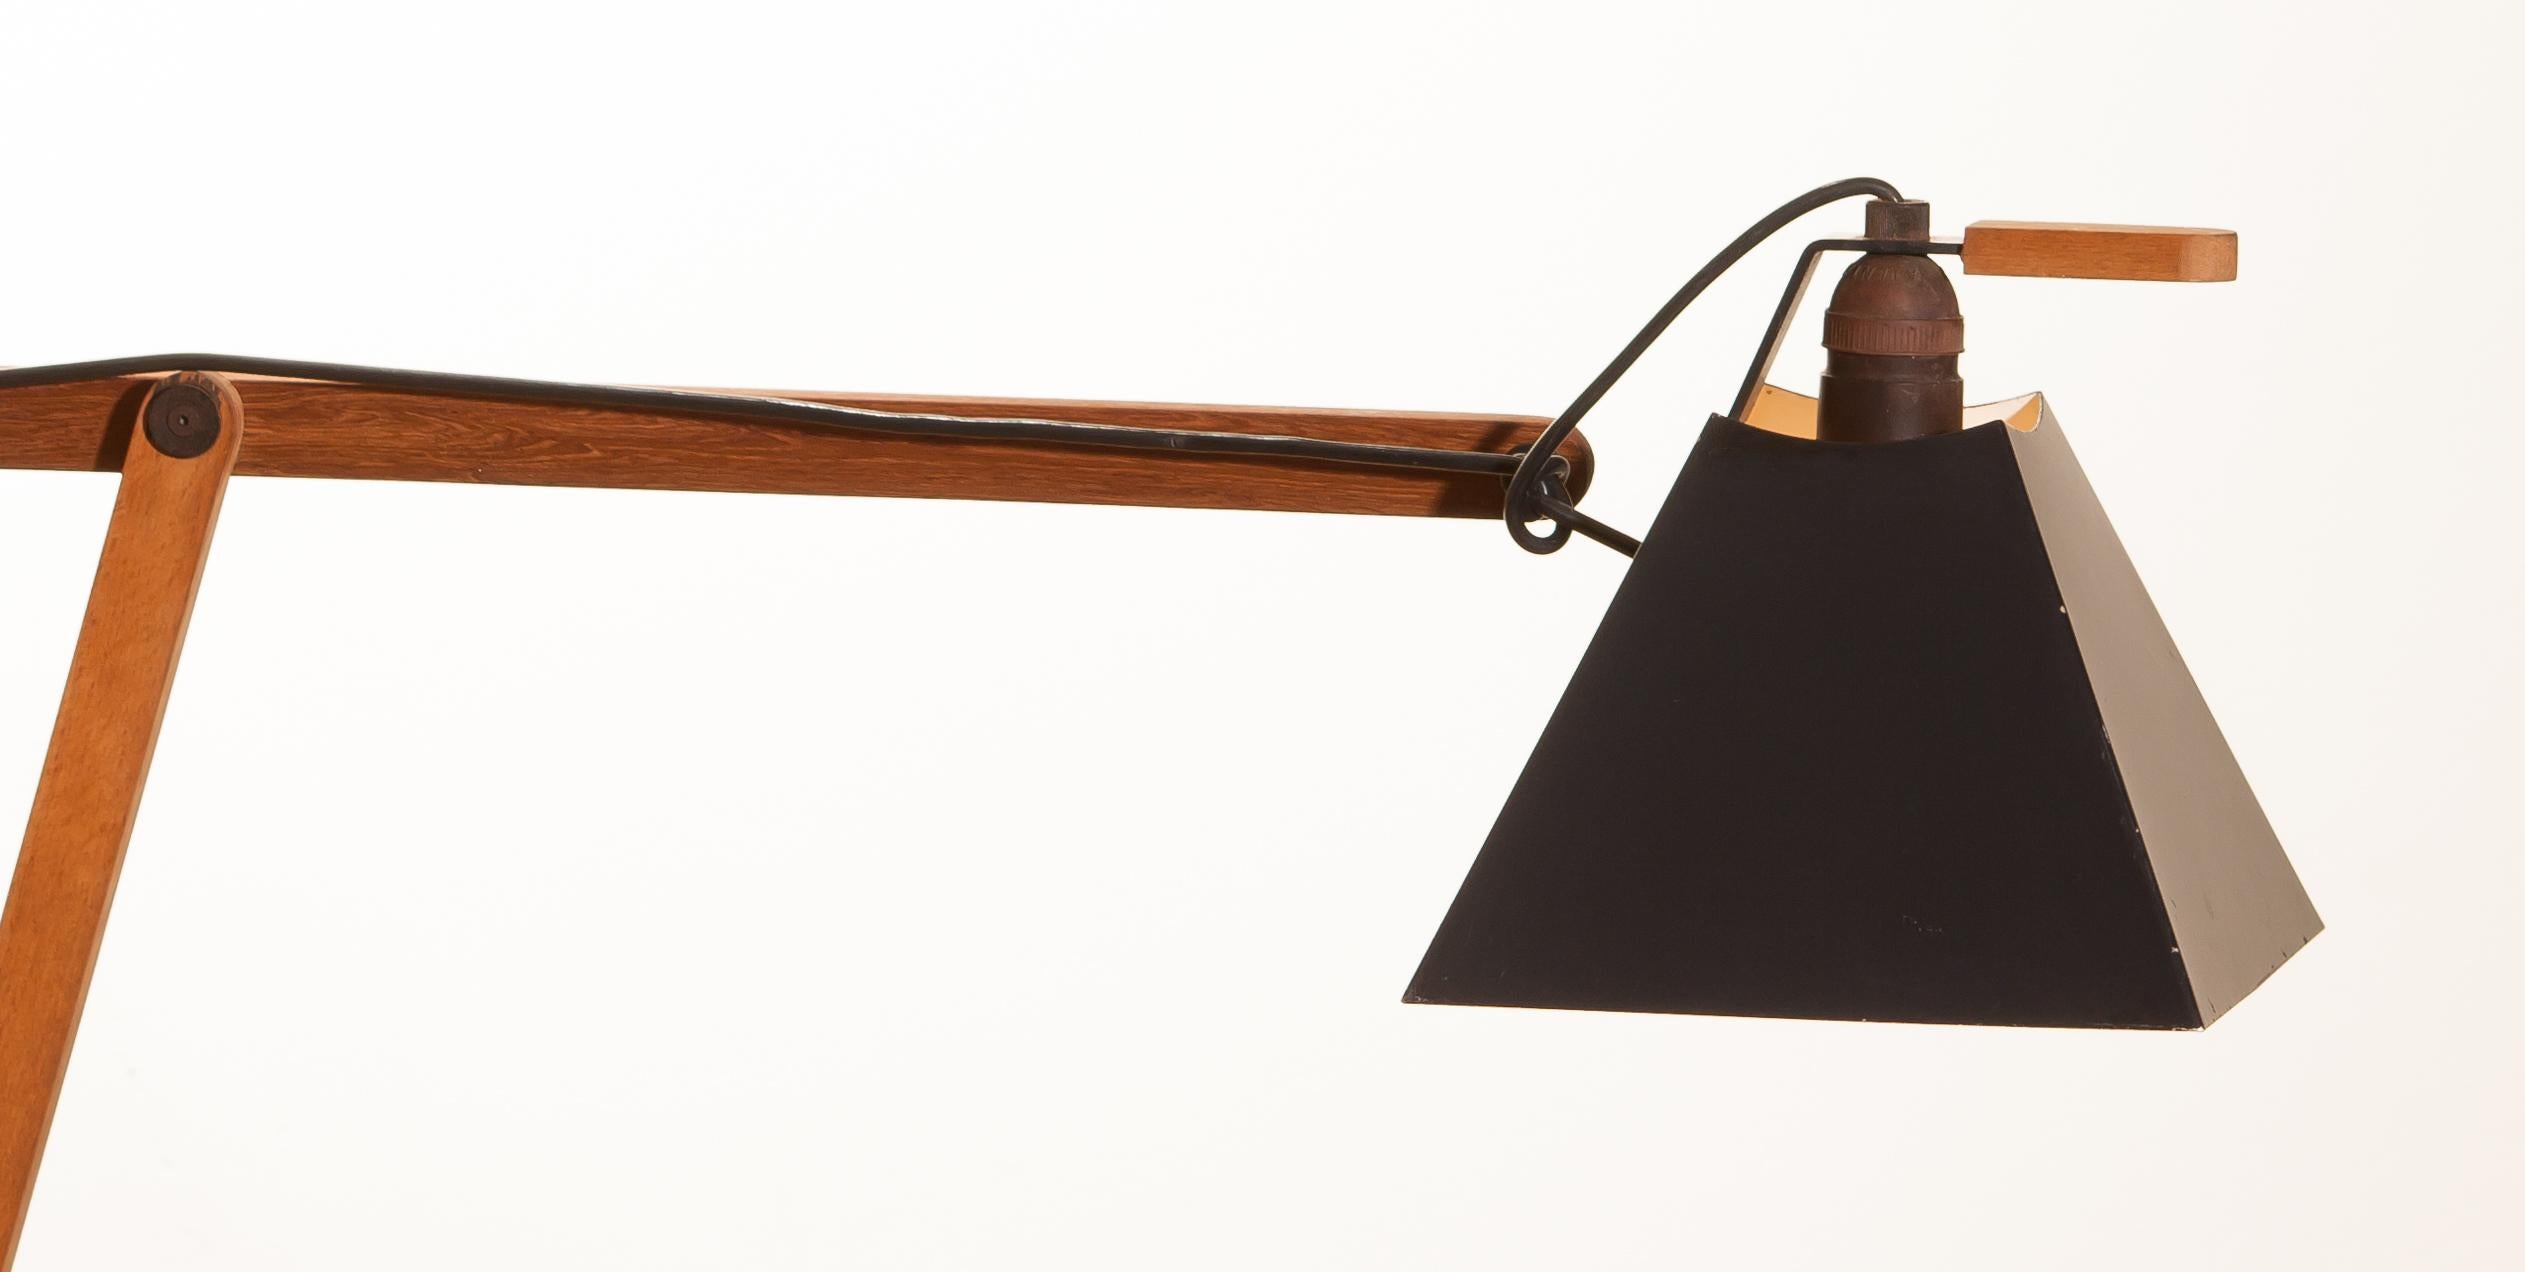 Magnificent rare floor lamps by Luxus, Sweden.
These lamps are adjustable by a counterbalance.
The stands are made of teak with a black lacquered shade.
They are labelled by Luxus and are in a beautiful condition.
Period 1950s.
Dimensions: H